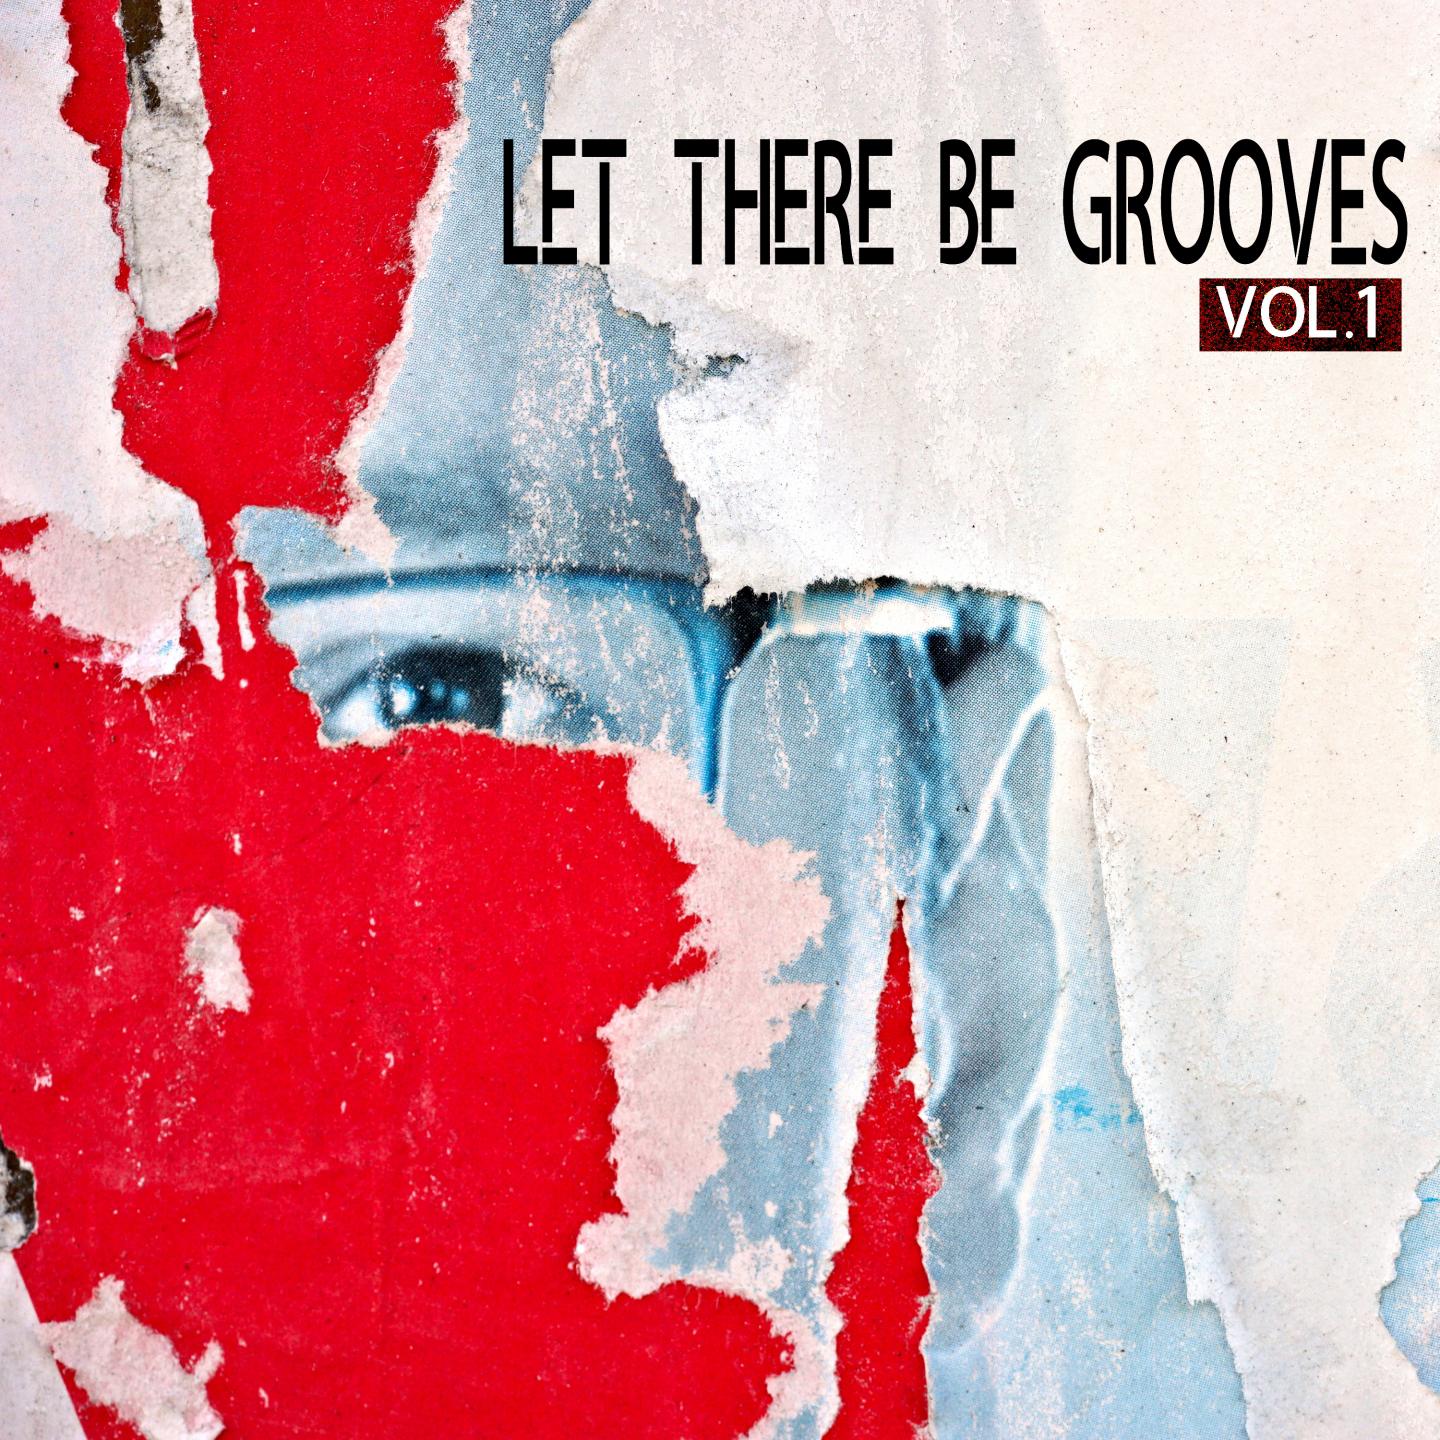 Let There Be Grooves, Vol. 1